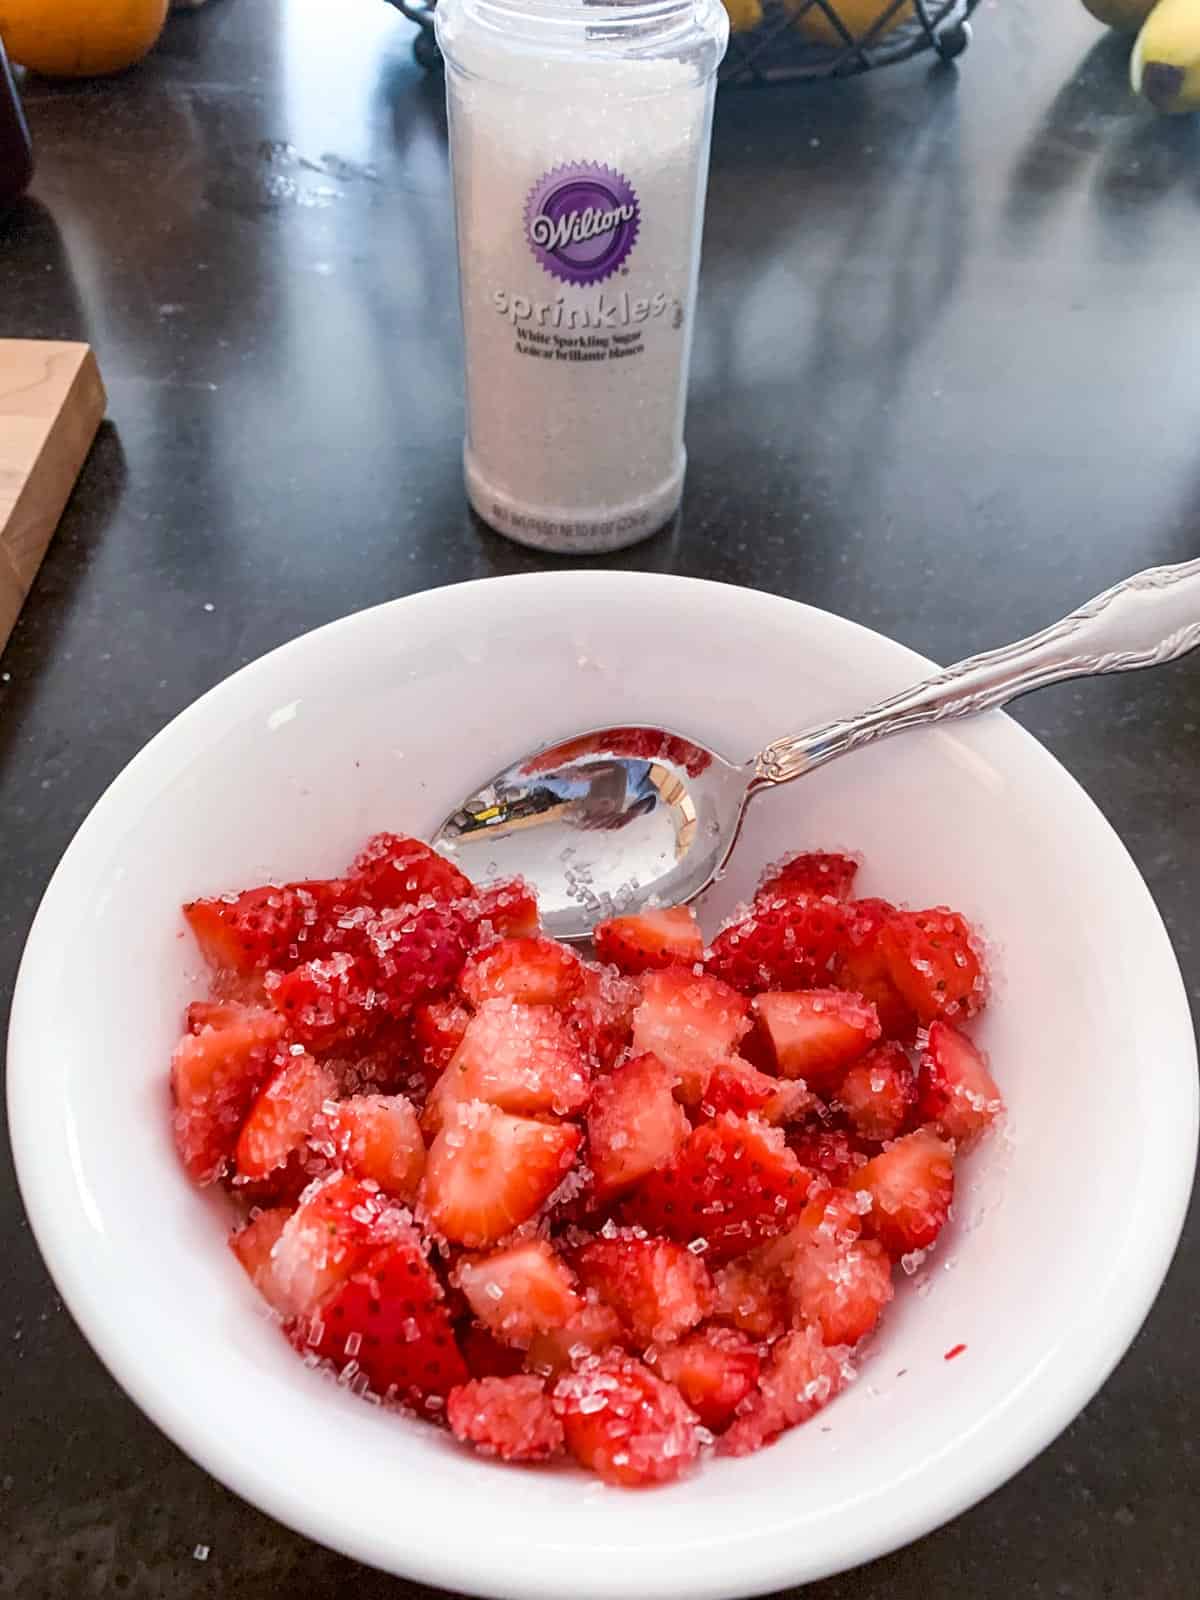 Mixing fresh cut up strawberries with course sprinkle sugar,